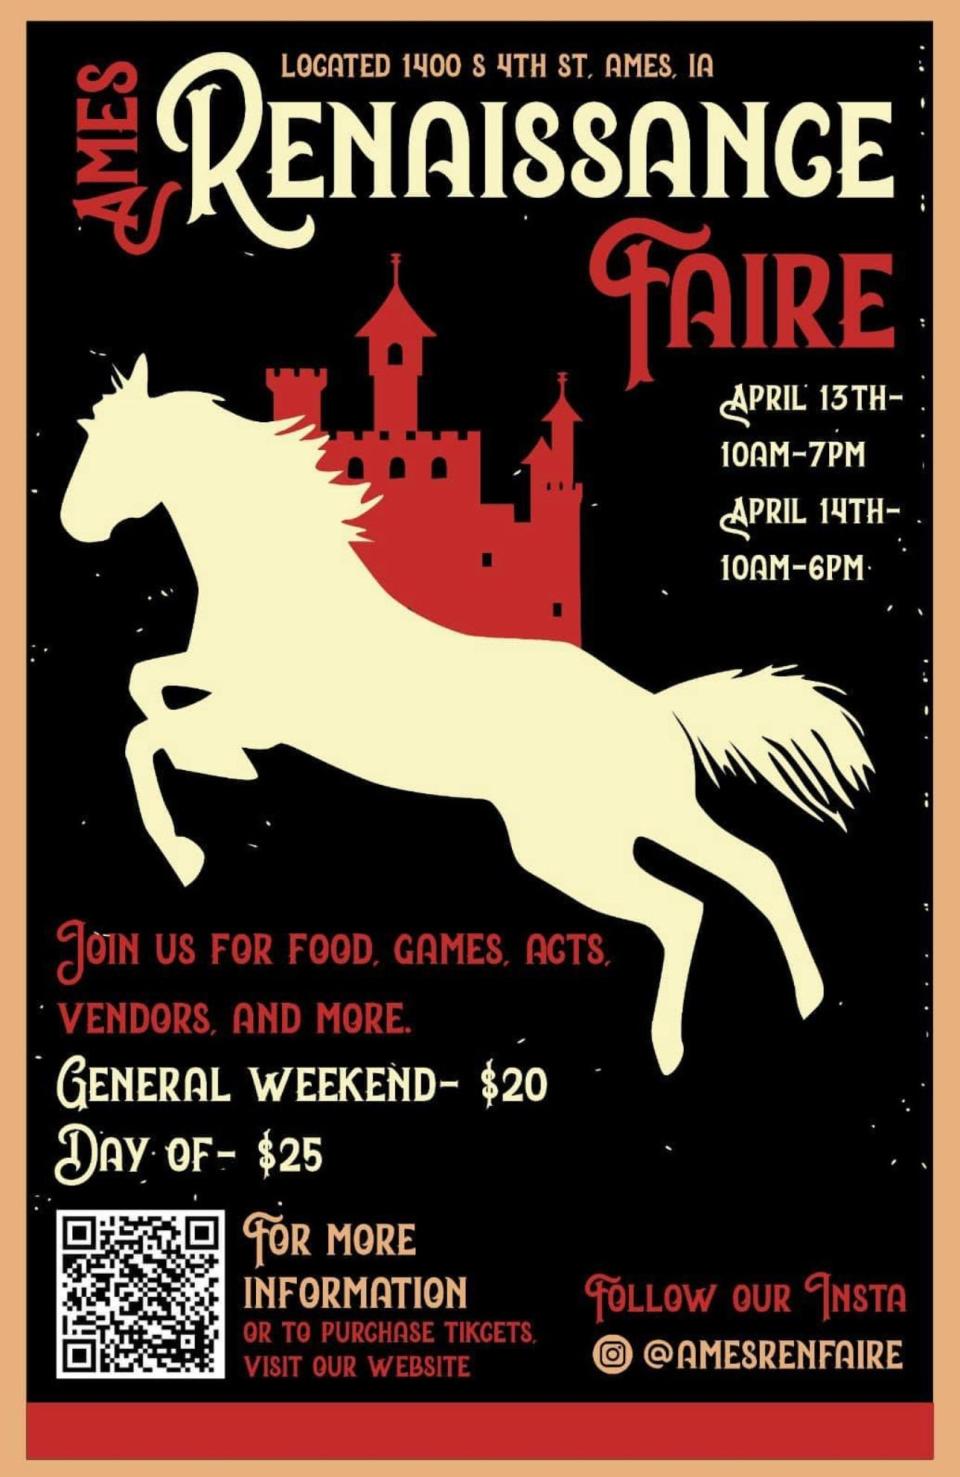 The Ames Renaissance Faire, a new brand-new event, will make its debut on Friday, April 13 and Saturday, April 14.